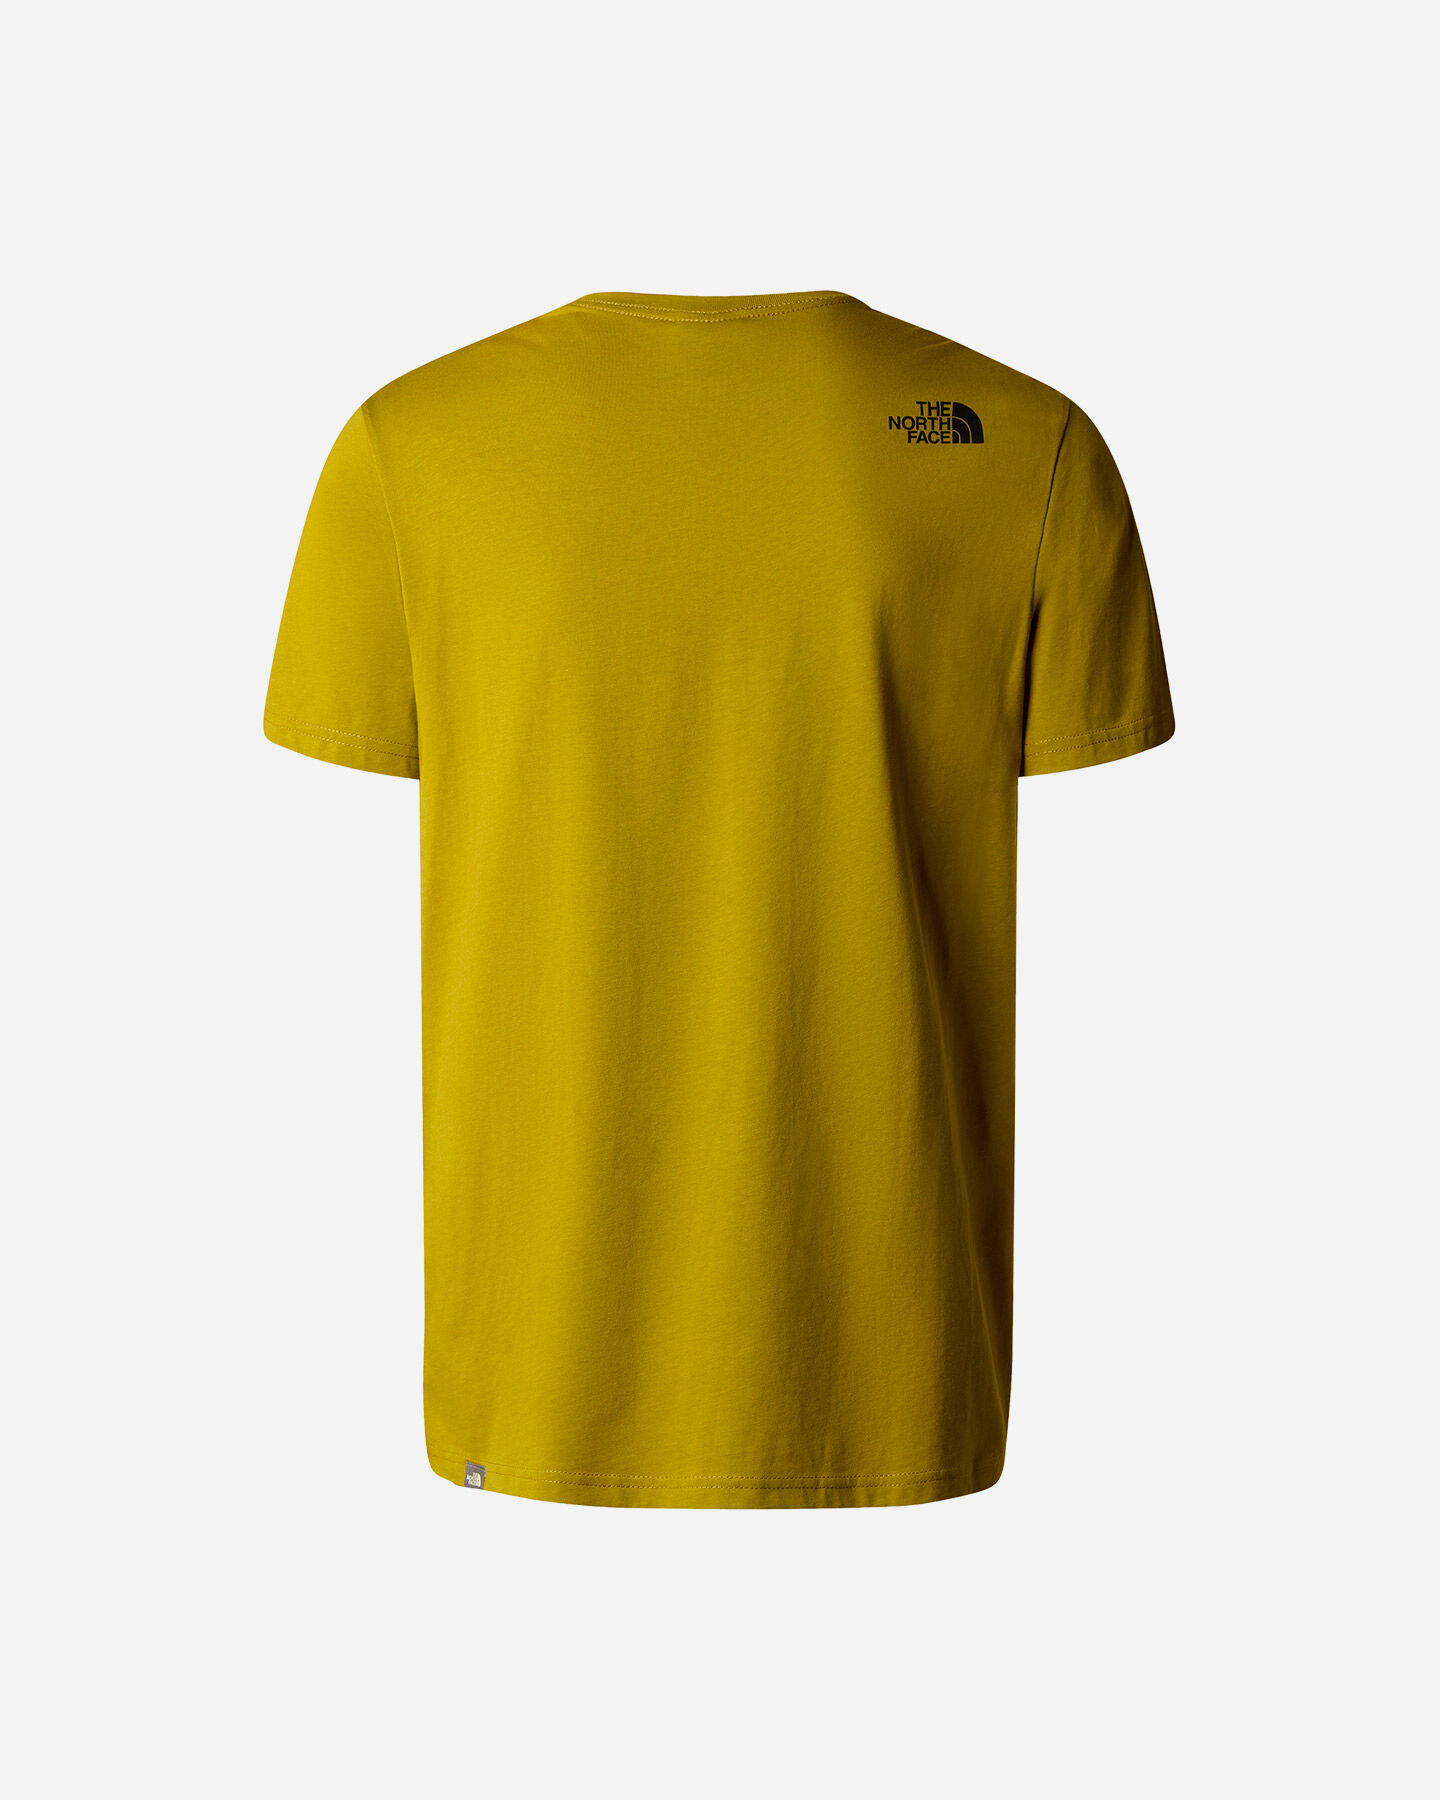  T-Shirt THE NORTH FACE EASY M S5597505|I0N|XS scatto 1